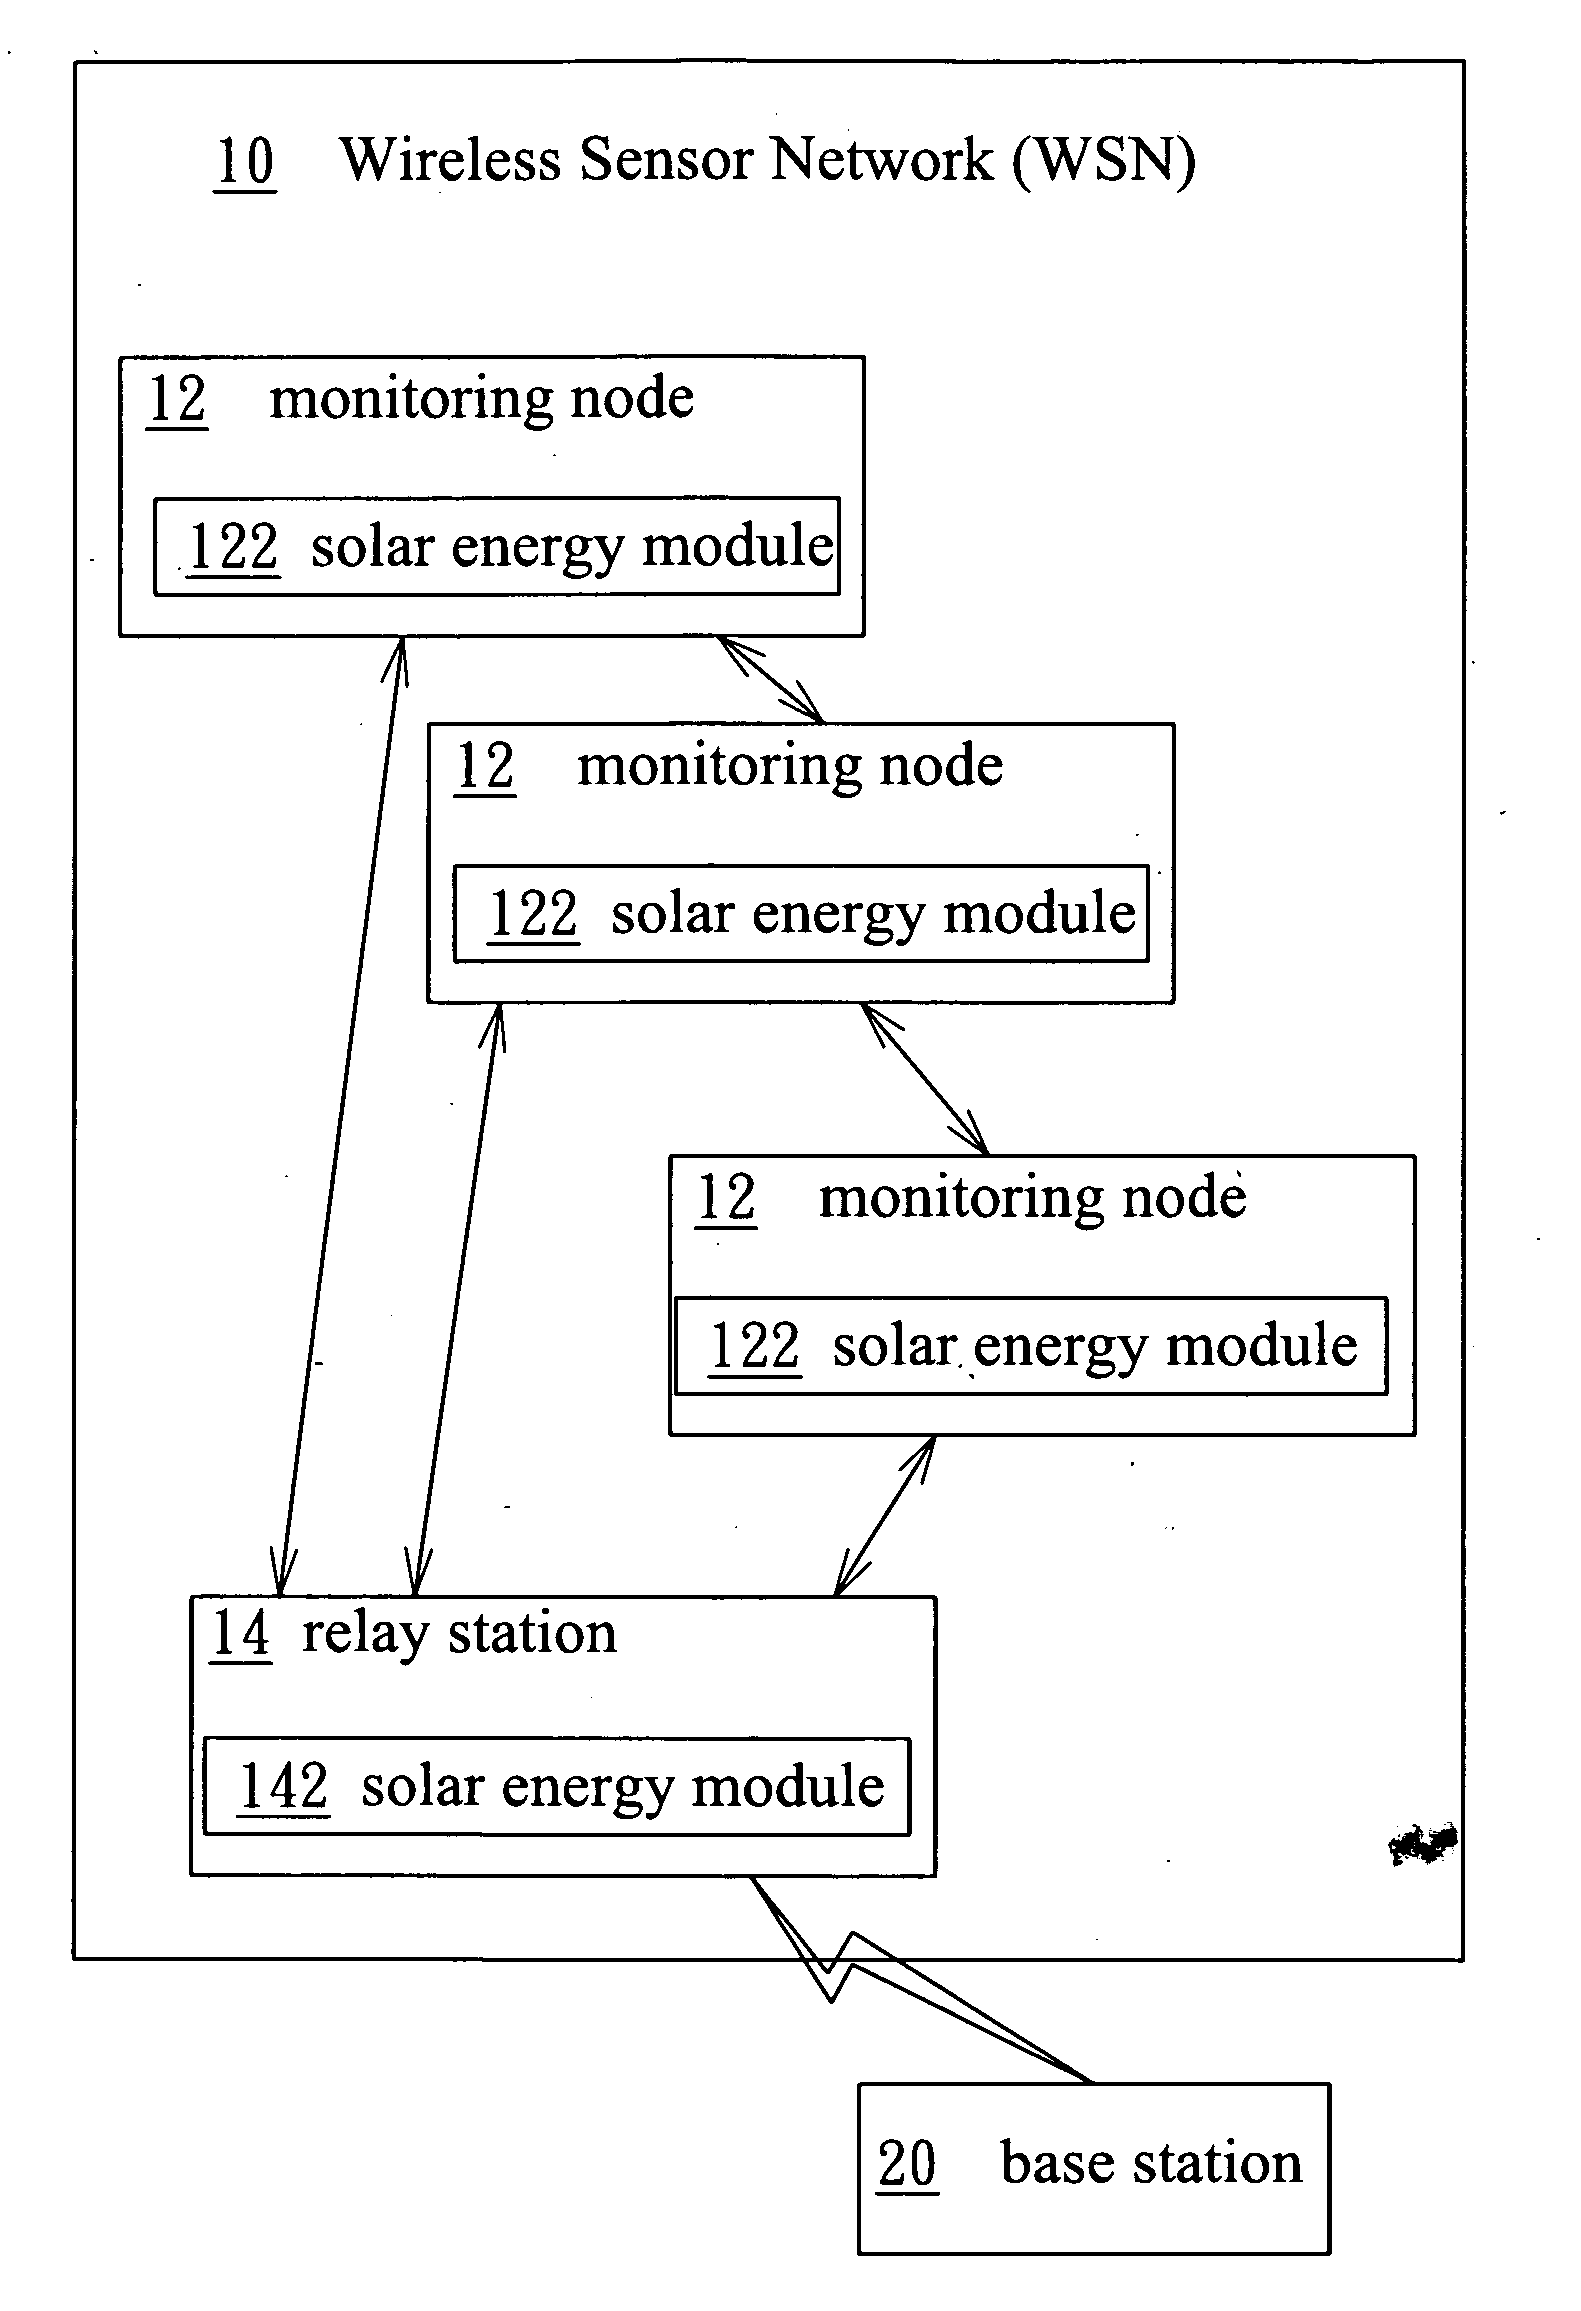 Using solar enery and wirless sensor network on the establishment of real-time monitoring system and method